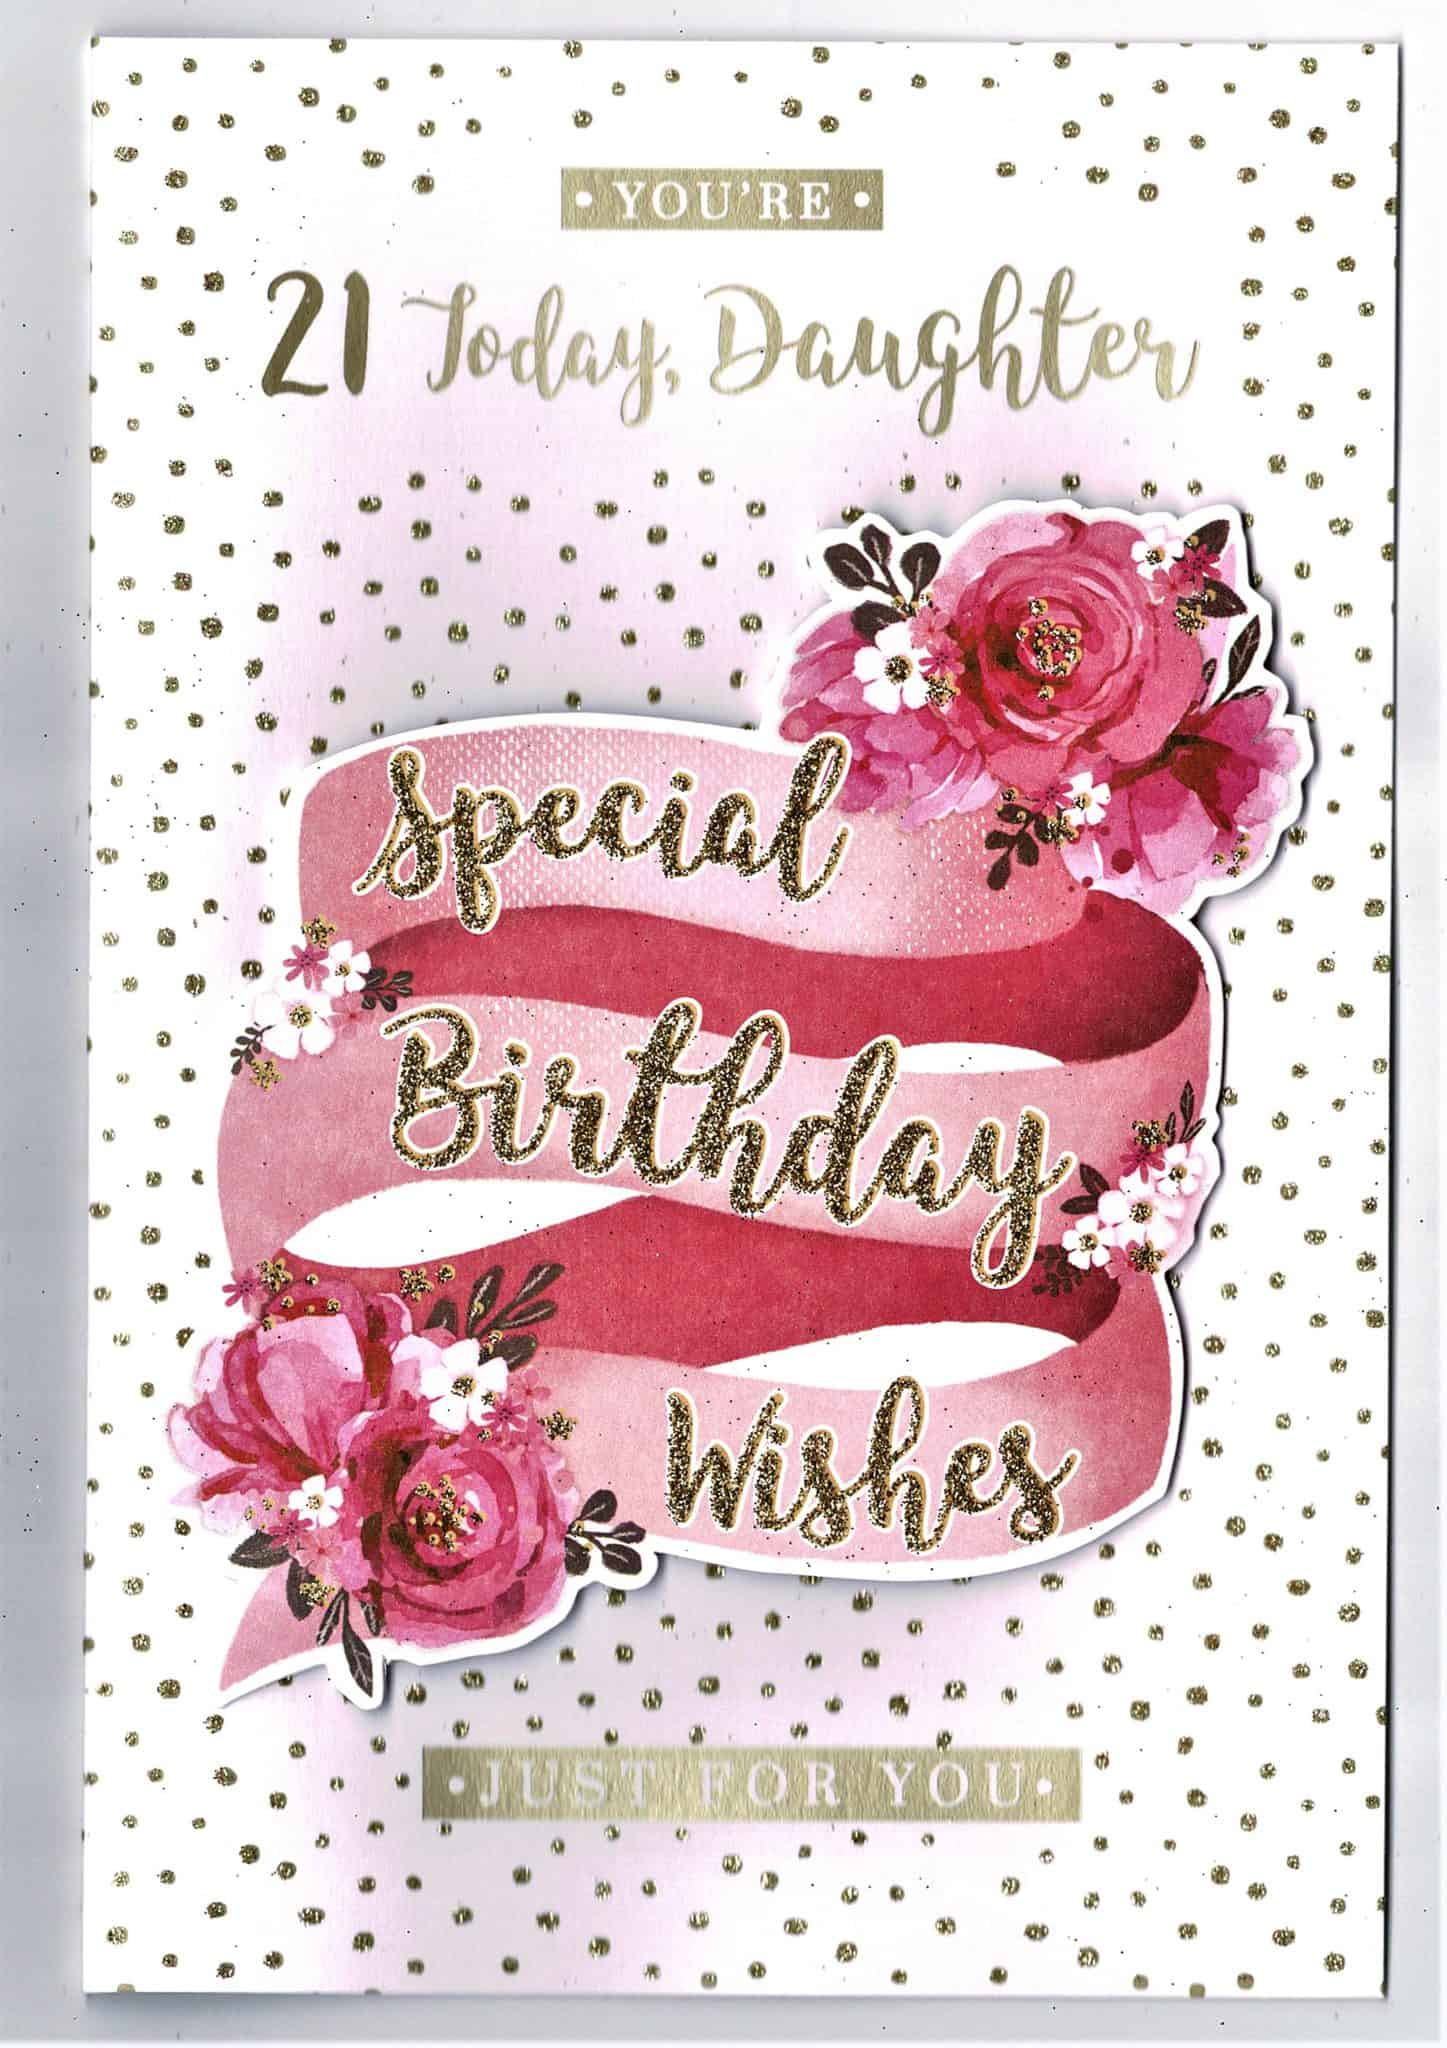 Daughter 21st Birthday ' You're 21 Today Daughter' Glitter Embossed ...